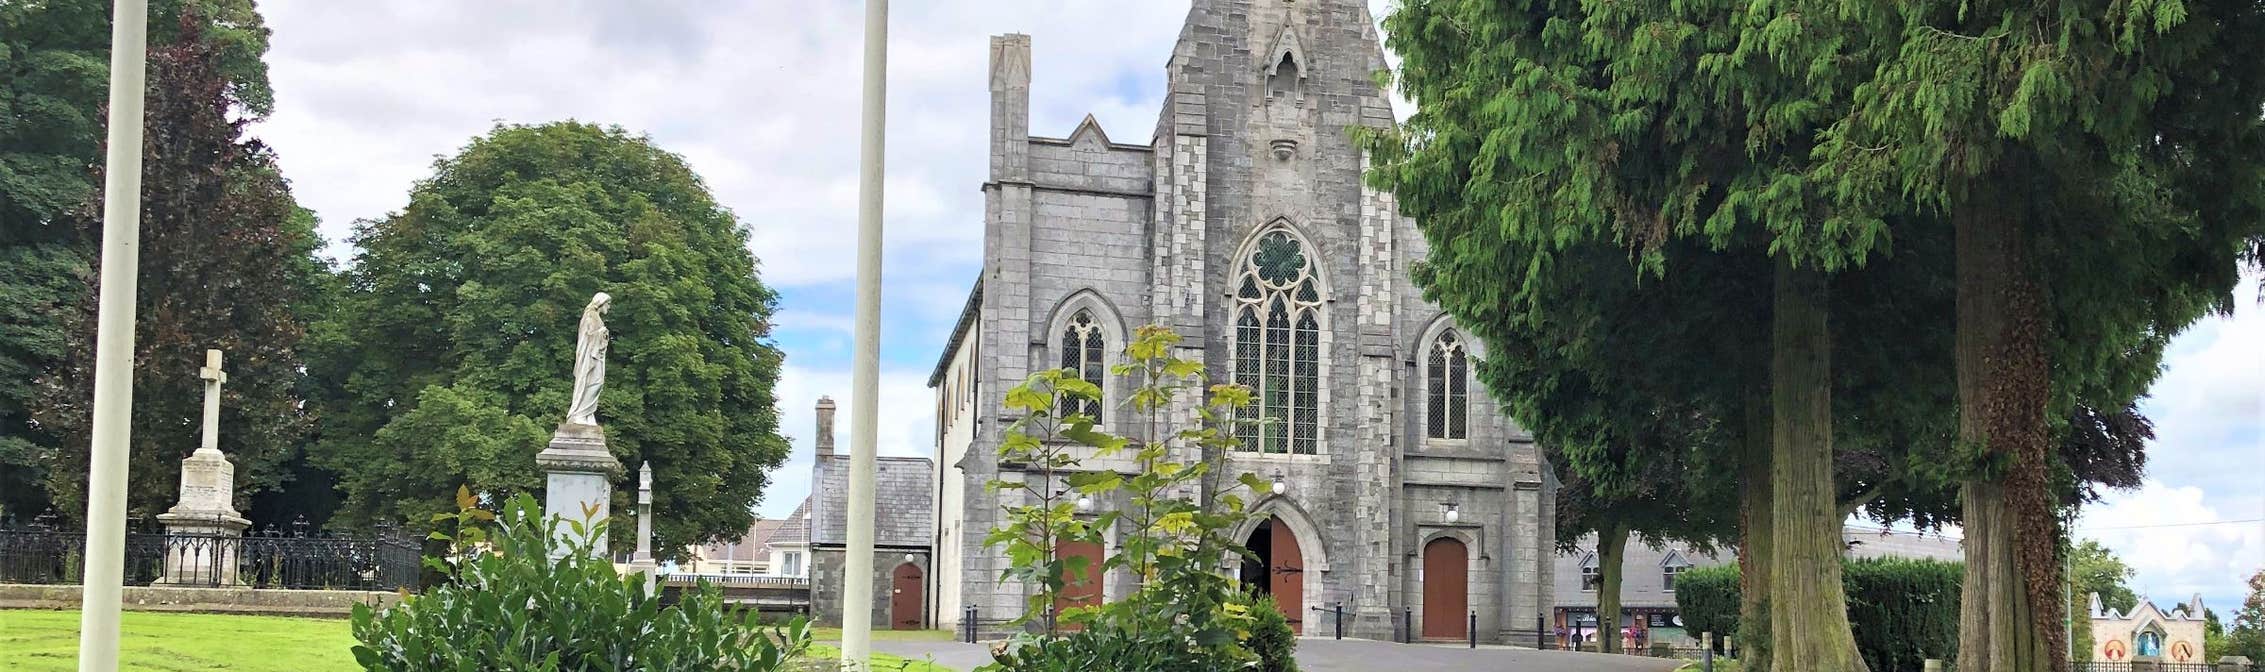 Image of a church in Ratoath in County Meath